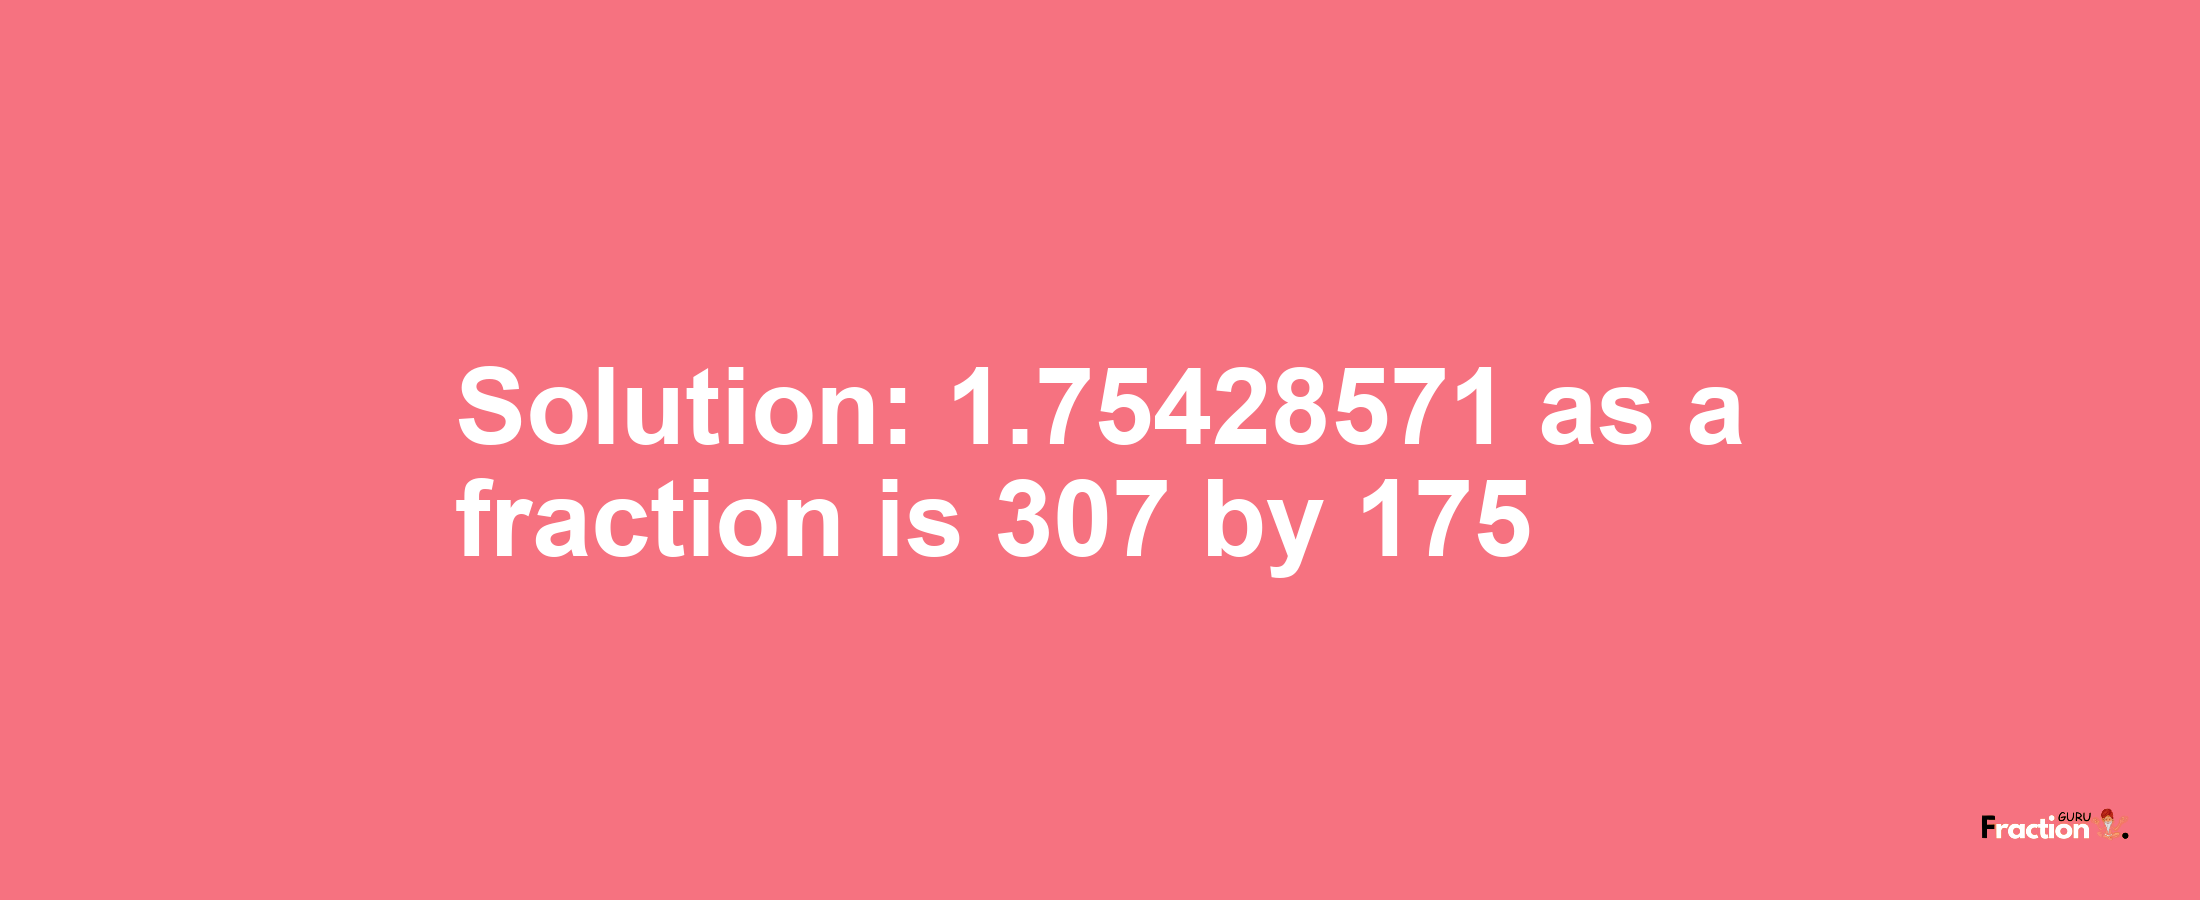 Solution:1.75428571 as a fraction is 307/175